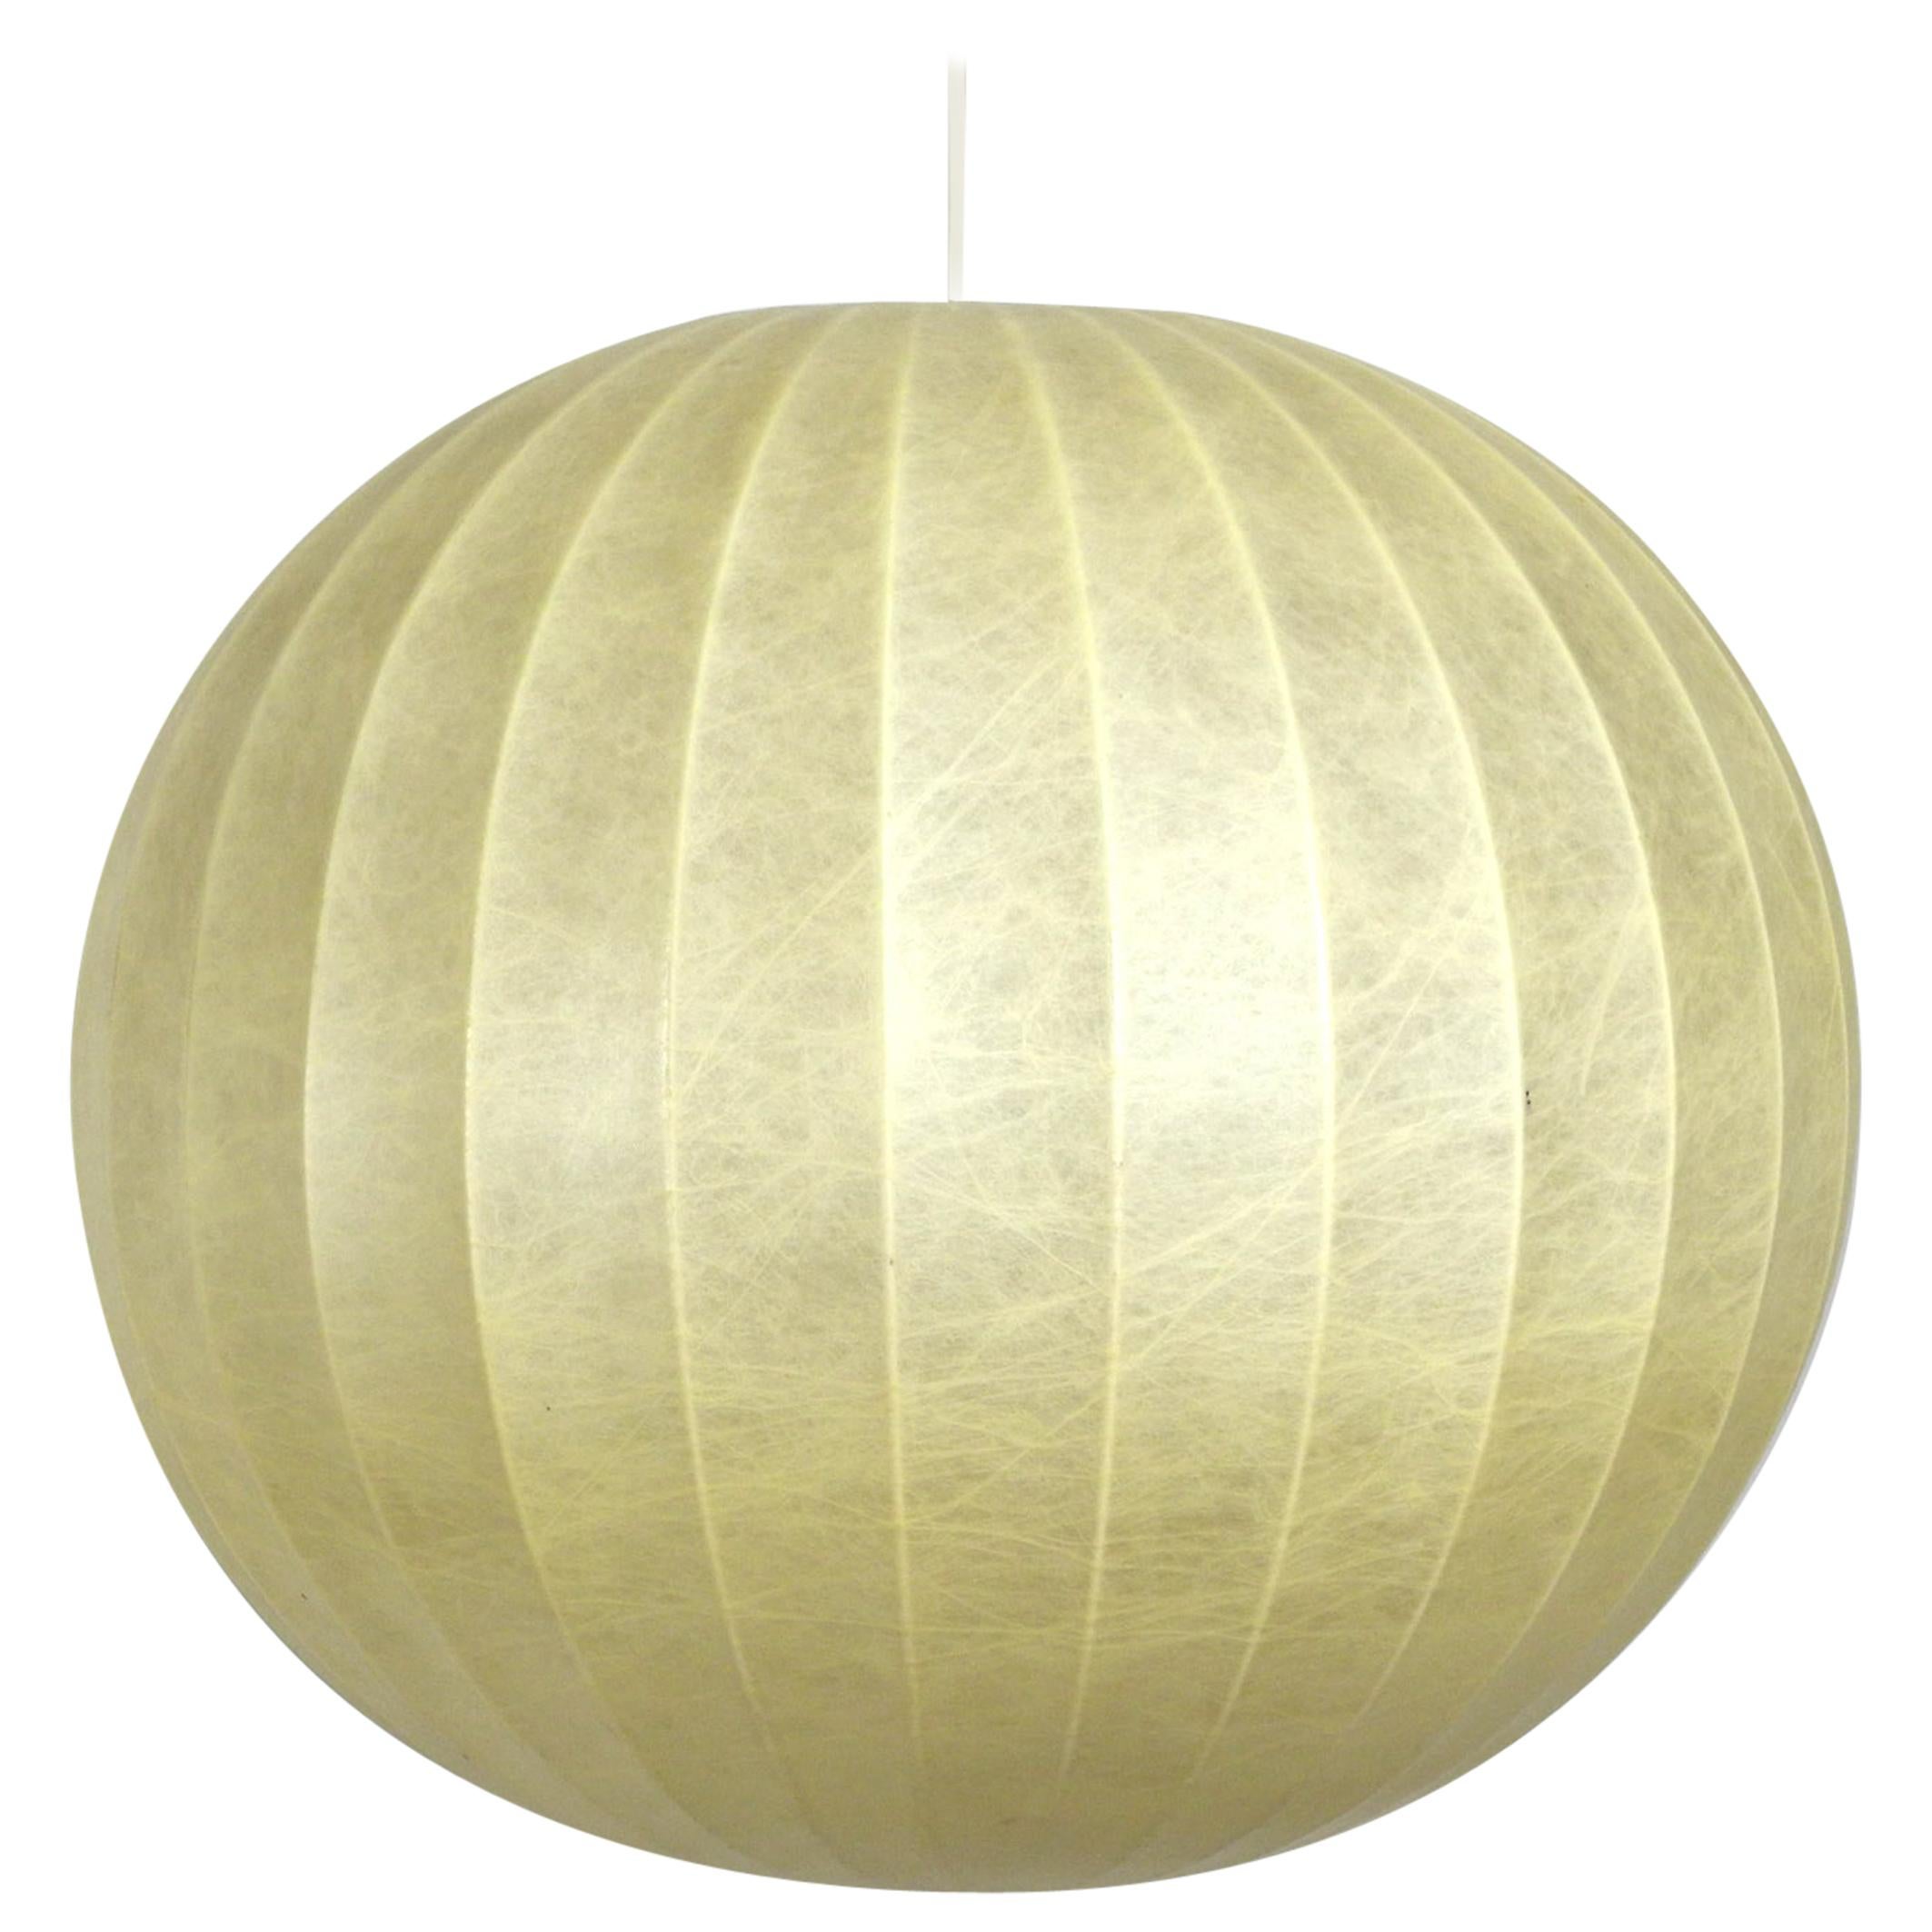 Extra Large Cocoon Big Ball Ceiling Lamp in Very Good Original Vintage Condition